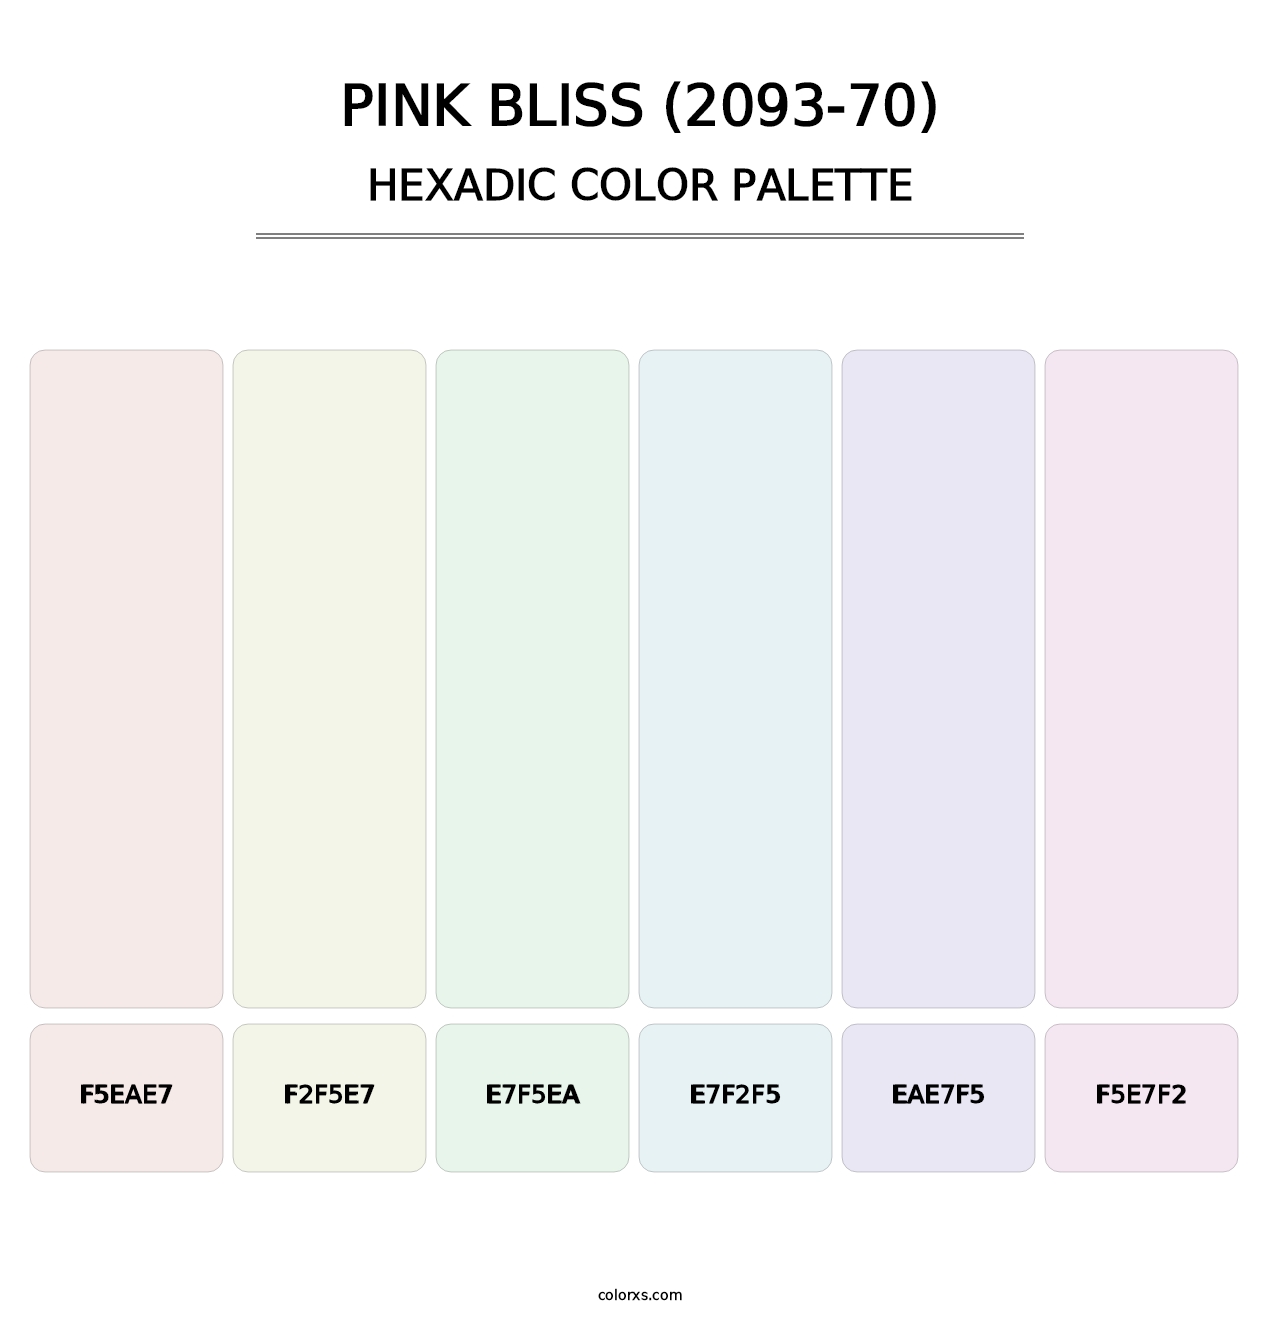 Pink Bliss (2093-70) - Hexadic Color Palette